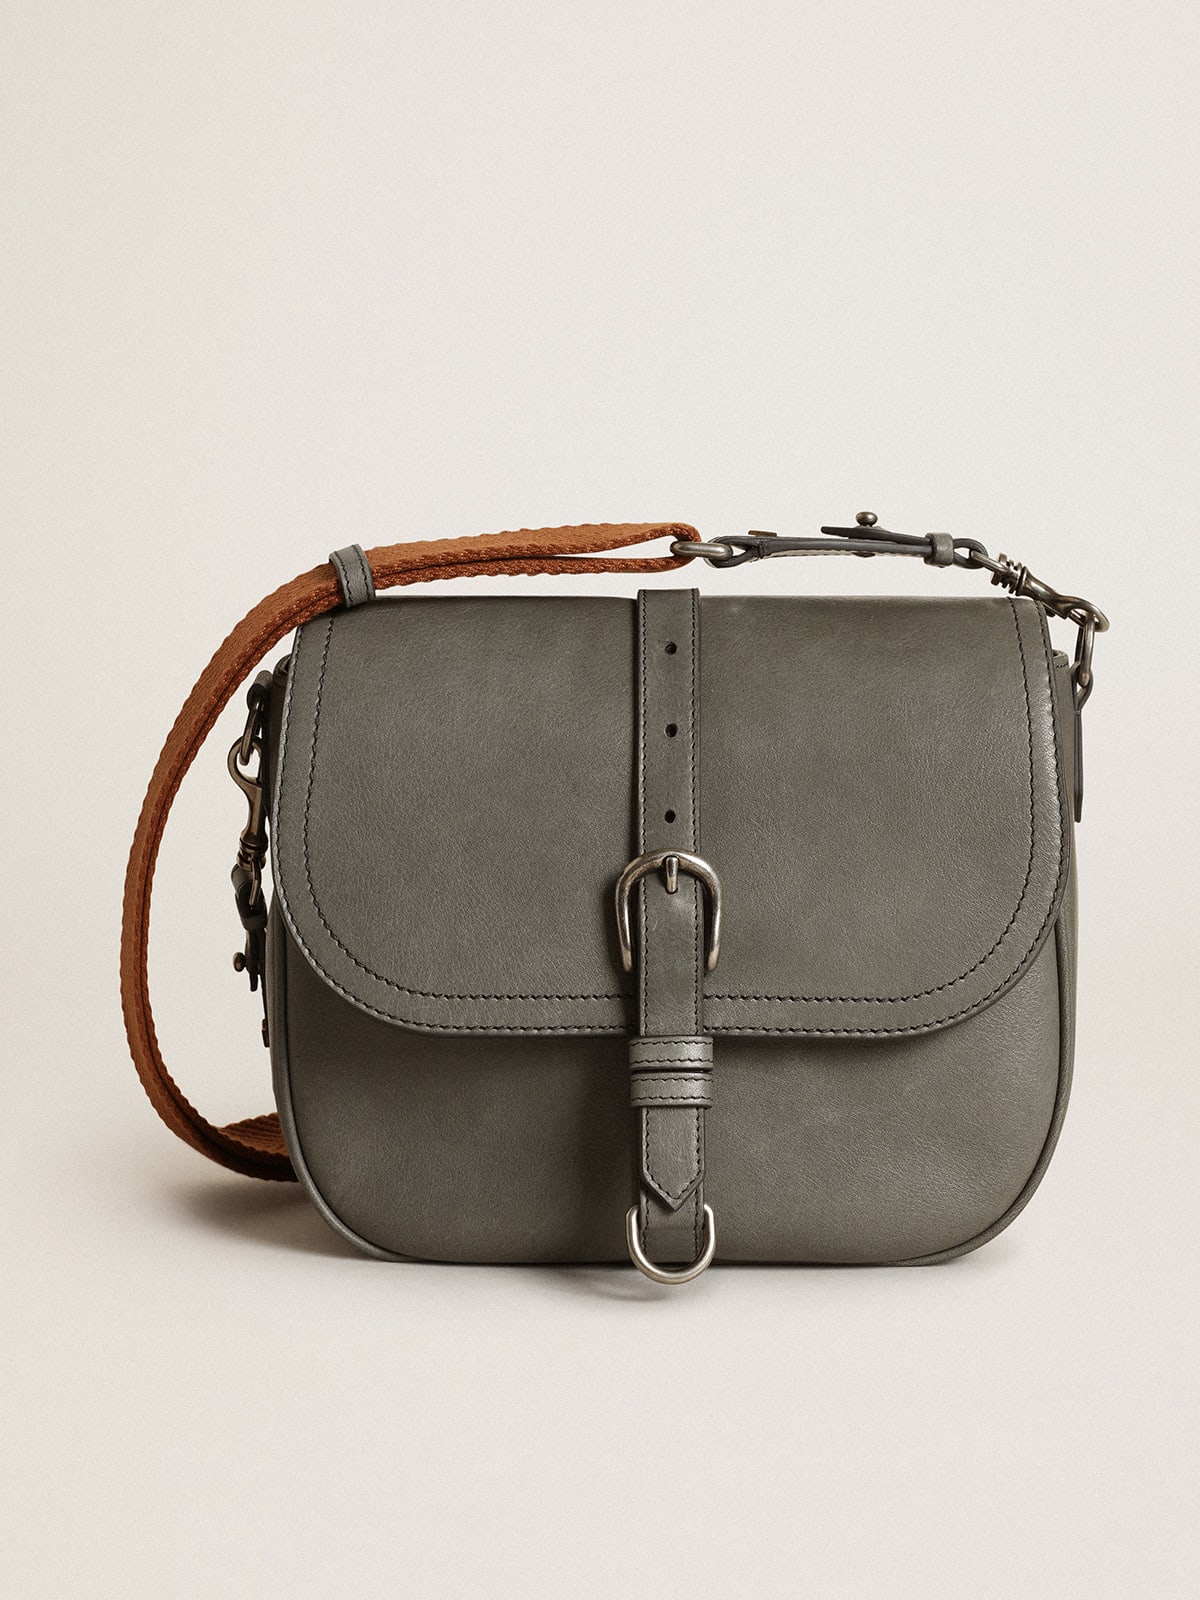 Medium Sally Bag in stone-gray leather with contrasting buckle and shoulder strap